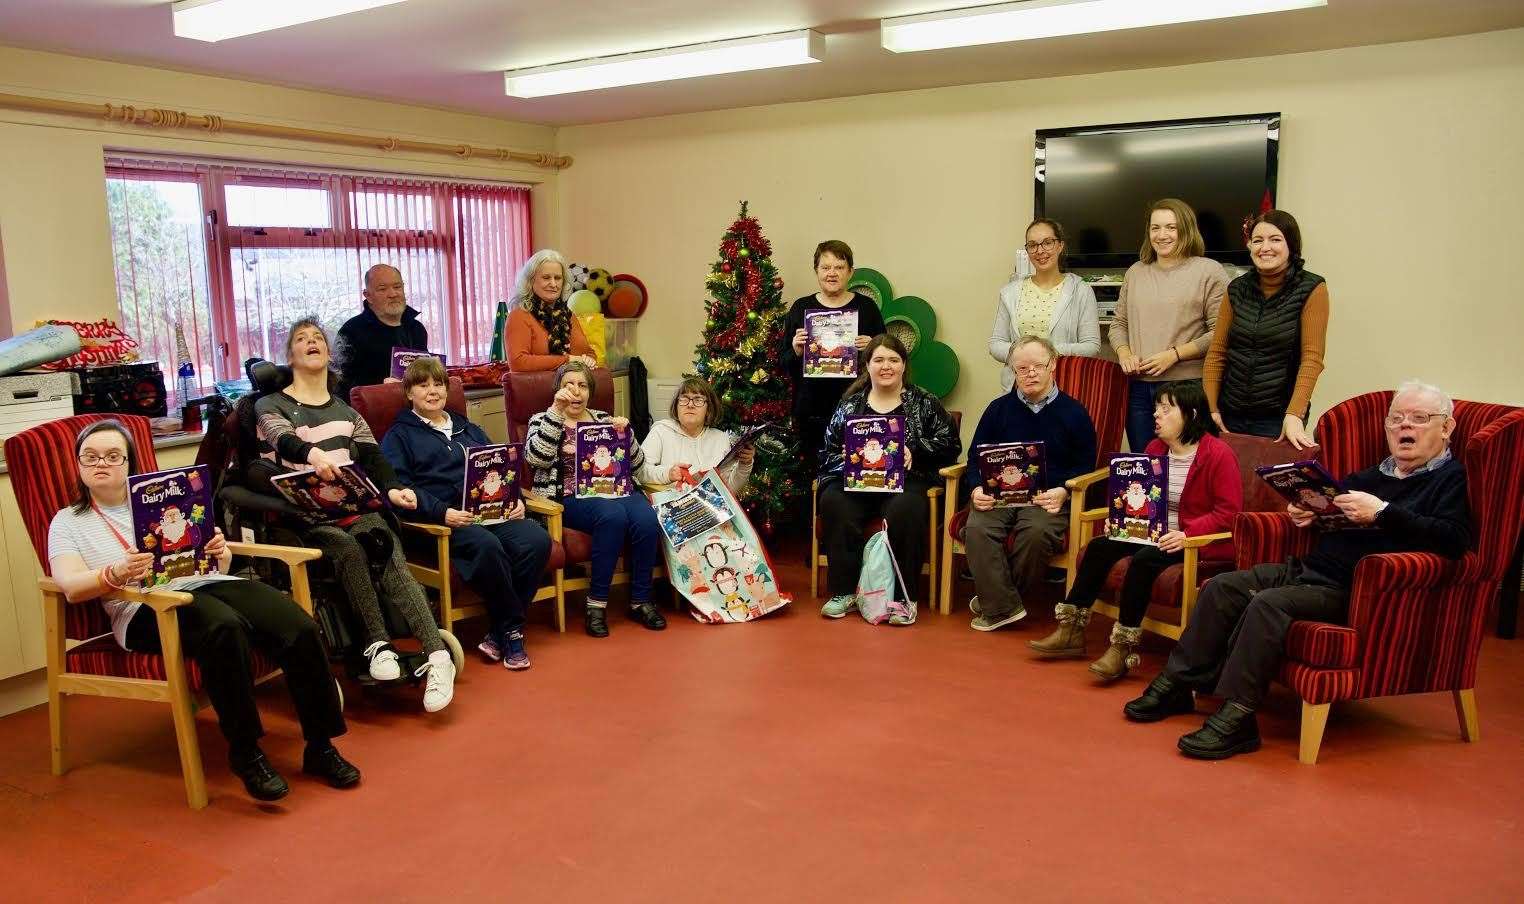 The group were delighted to receive a generous donation of advent calendars. Picture: Phil Harman